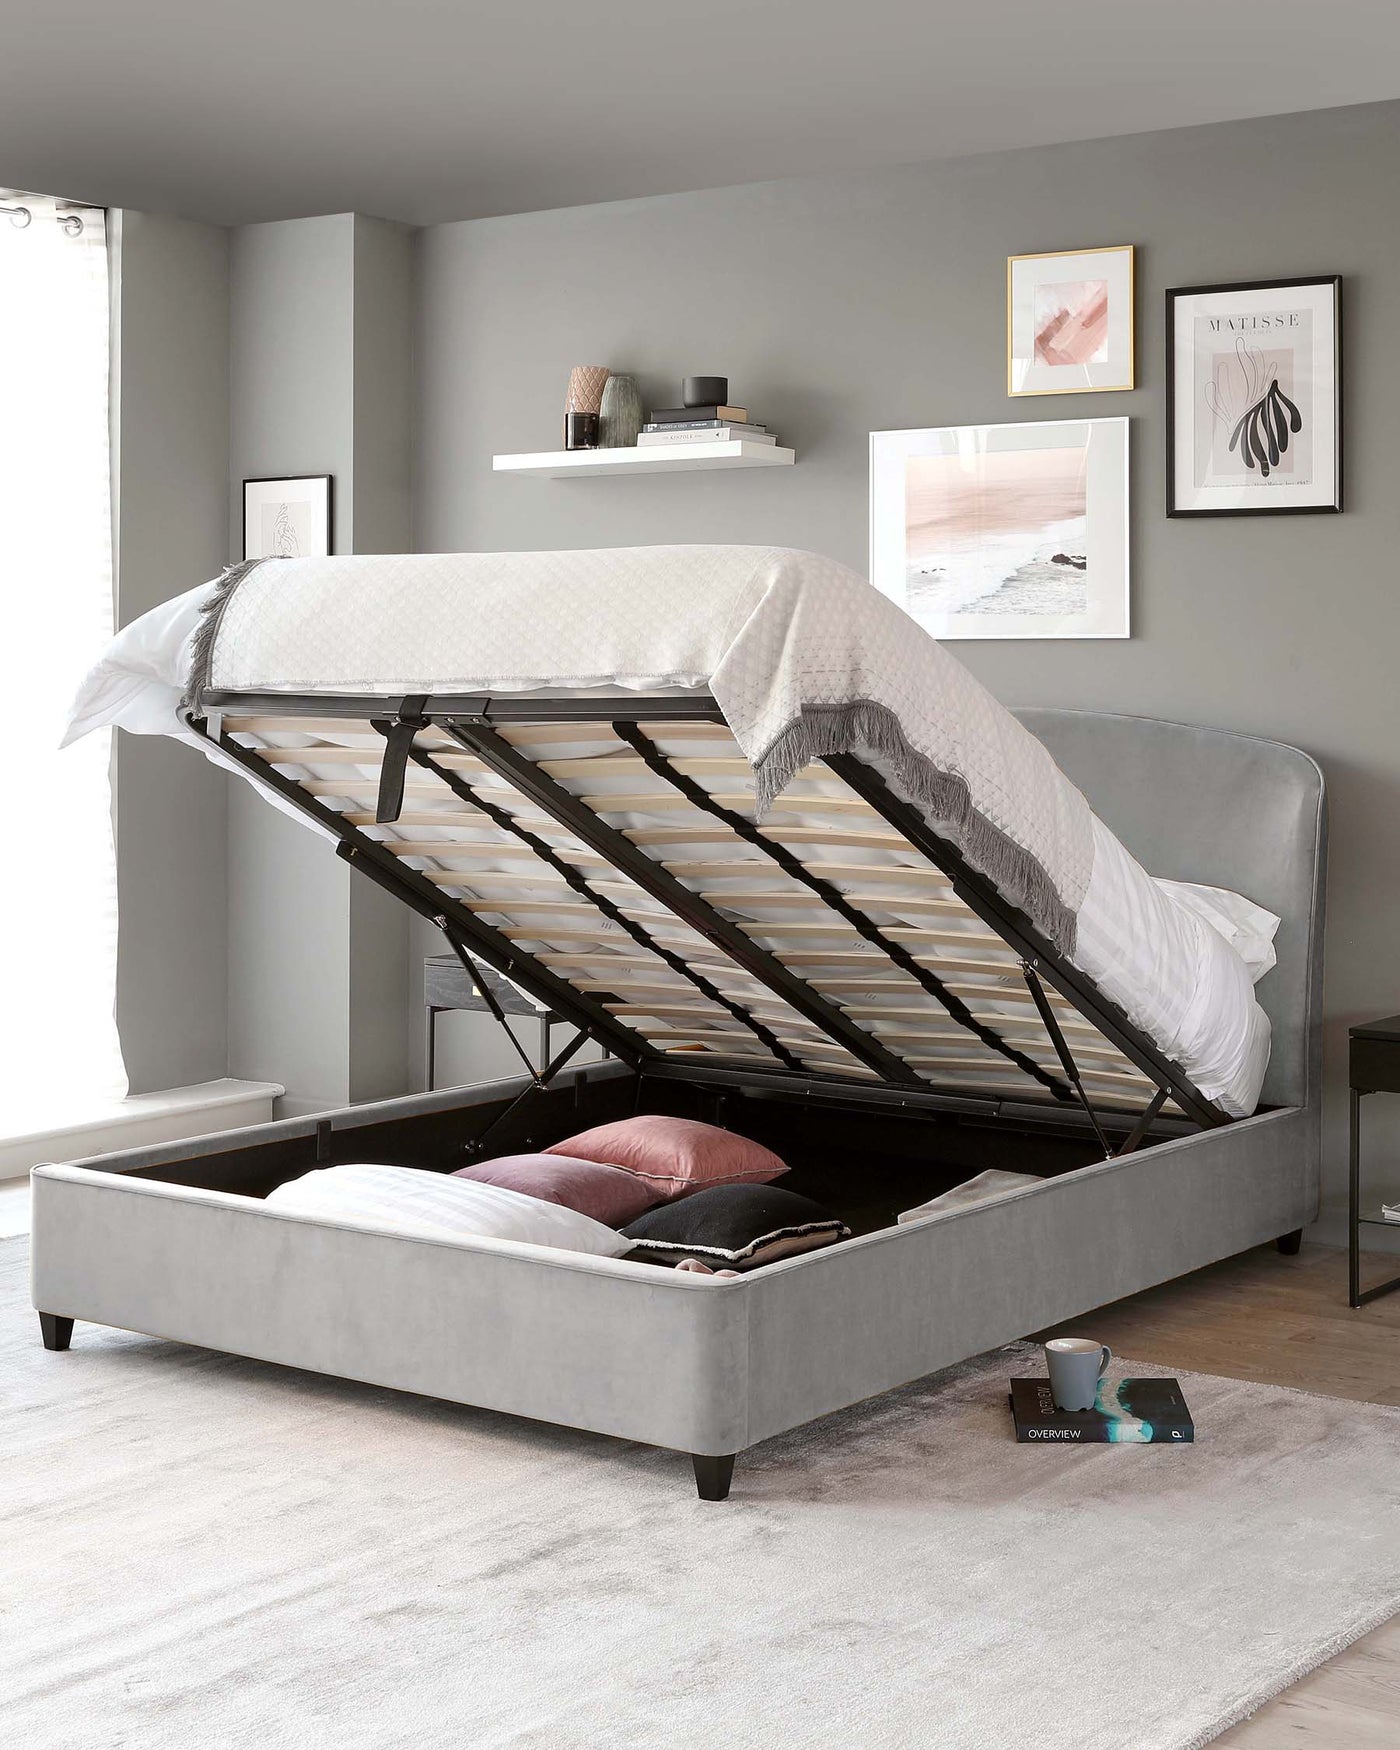 Gray upholstered storage bed with lifted mattress platform revealing under-bed storage space, set in a room with neutral decor and wall art.